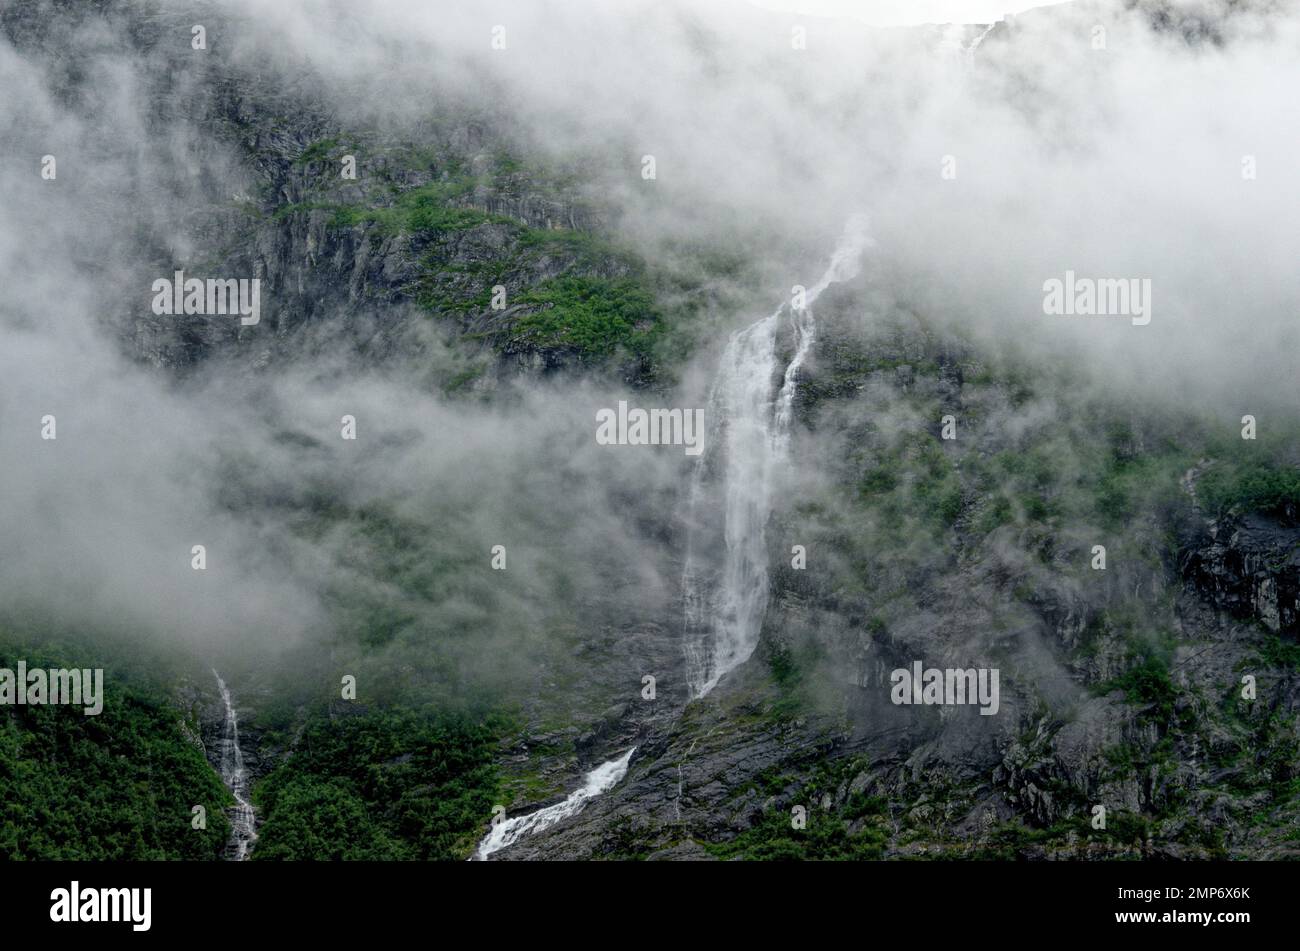 Travel destination Norway. Jostedalsbreen National Park - Waterfall - Europe travel destination Norway 12th of June 2012 Stock Photo